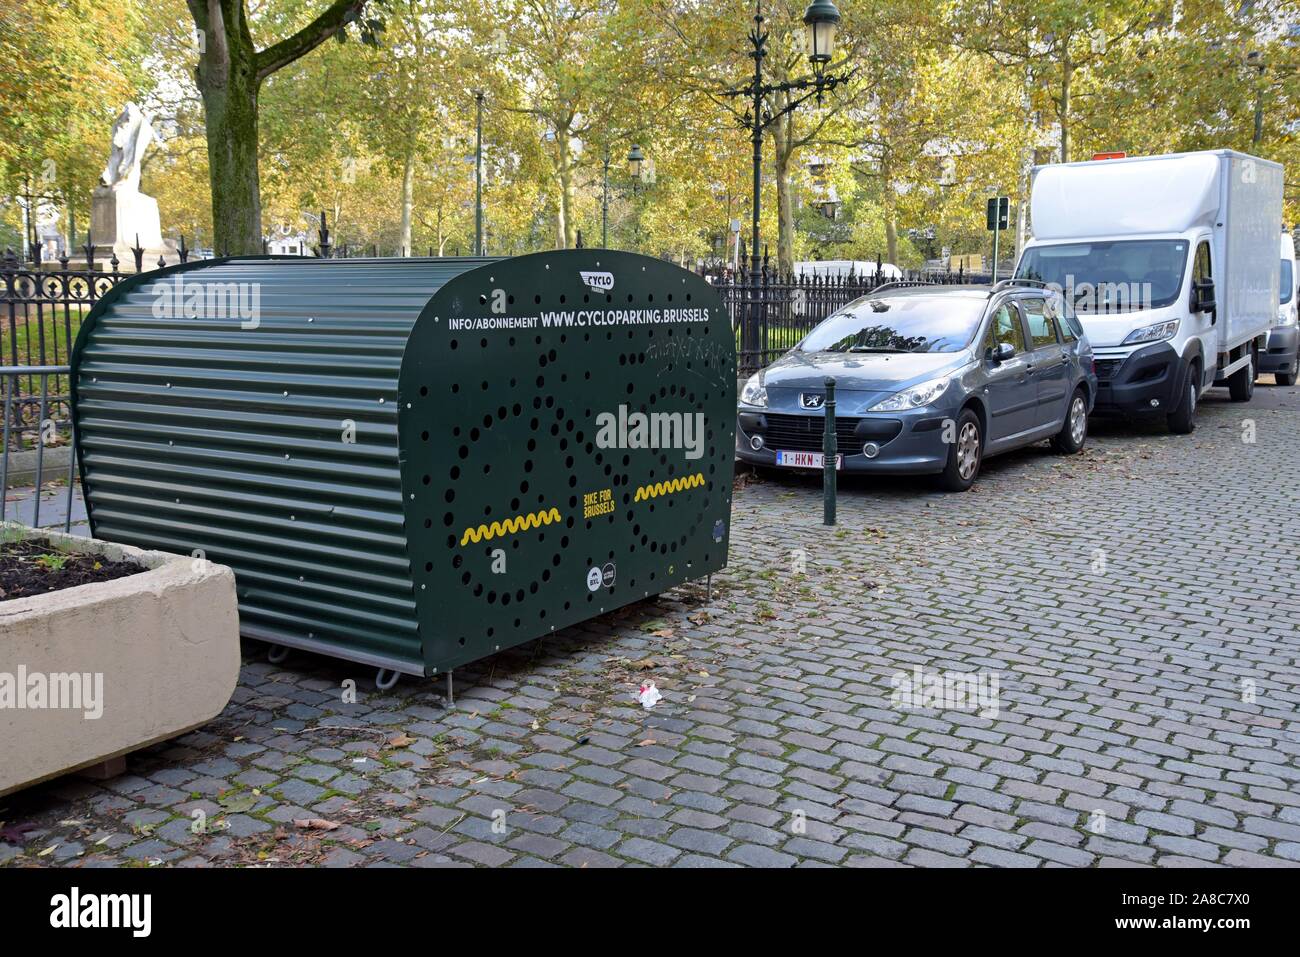 A secure bicycle parking locker operated by cycloparking Brussels in Place Jean Jacobs, Brussels, Belgium Stock Photo